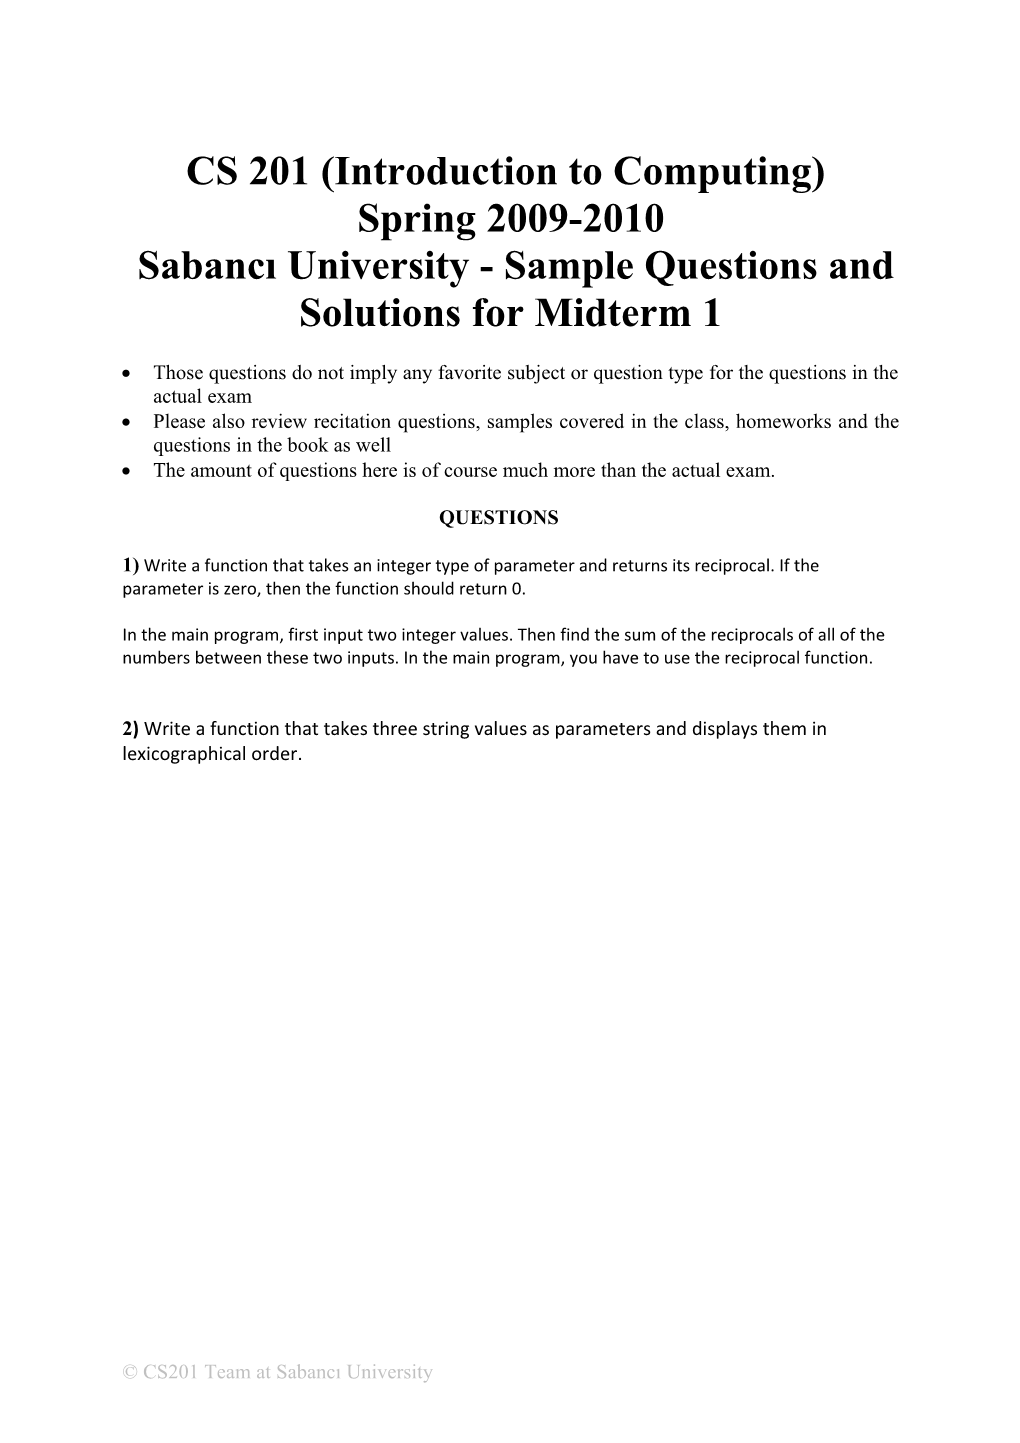 Sabancı University - Sample Questions and Solutions for Midterm 1